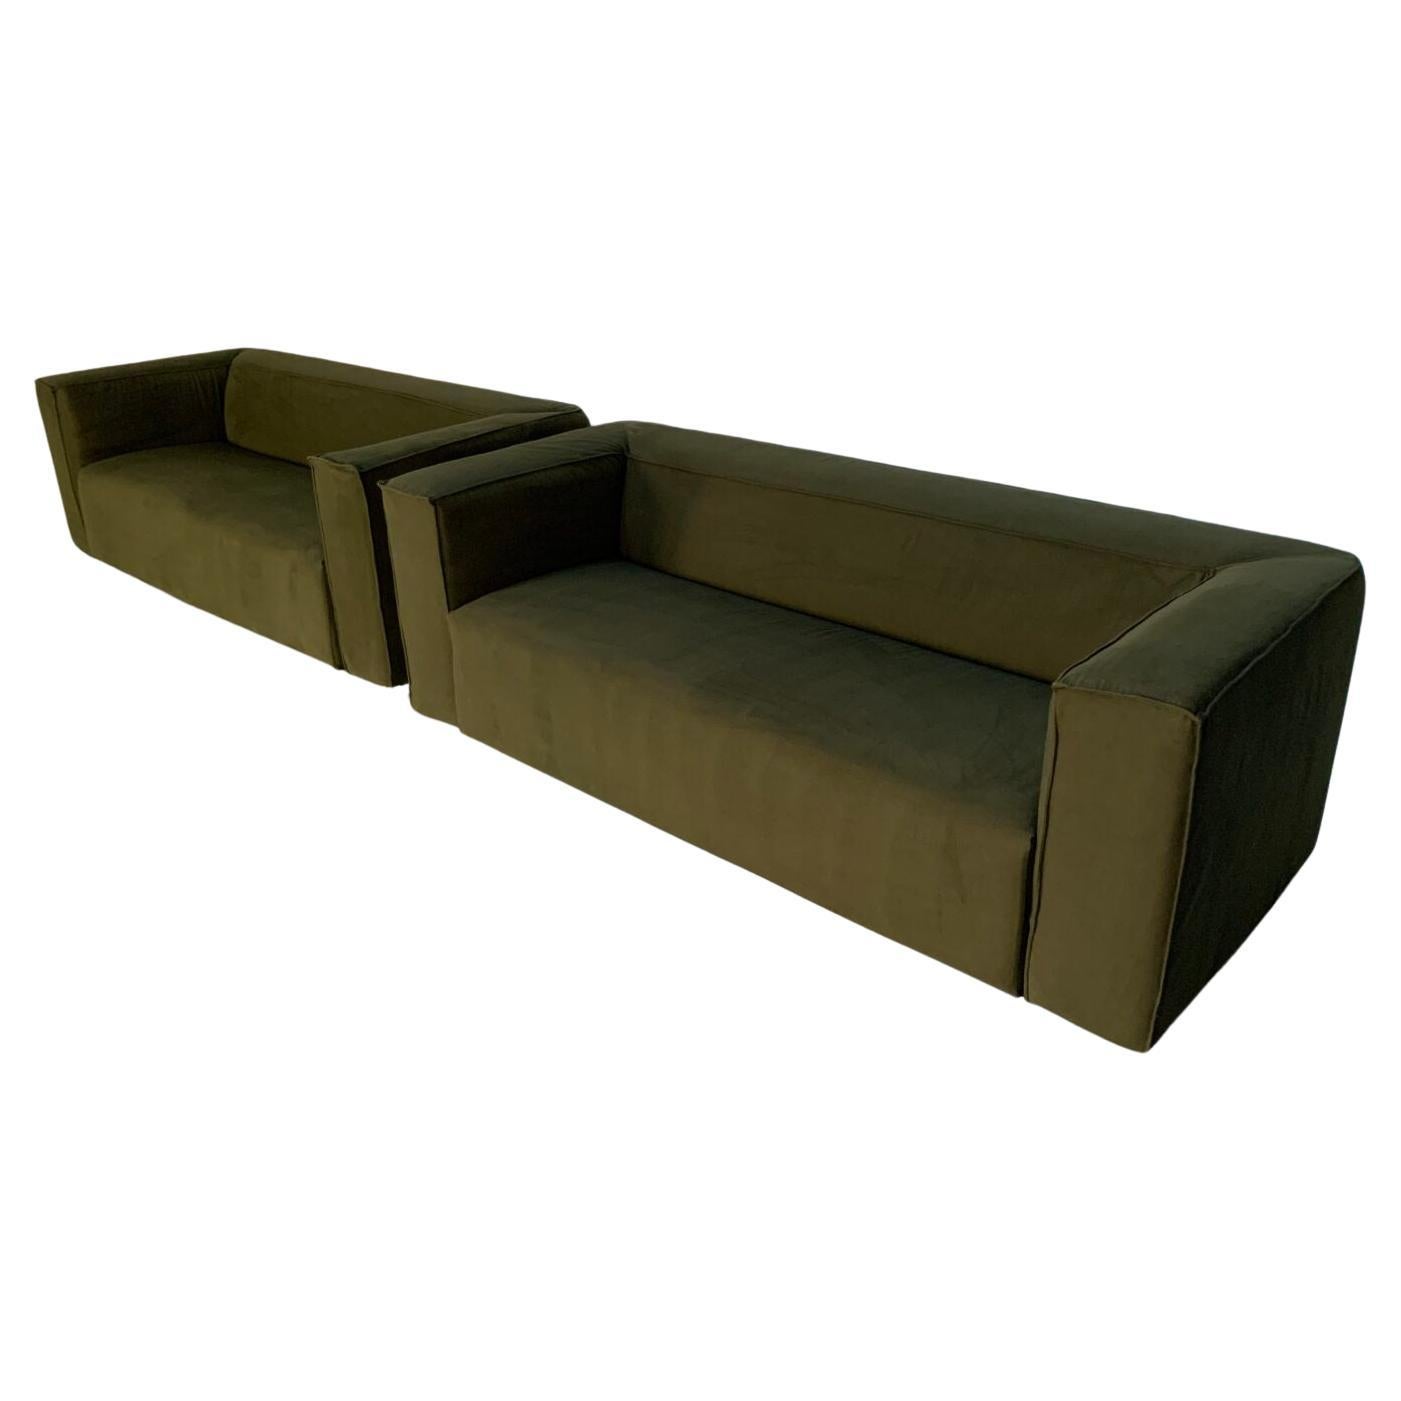 Pair of Cassina "180 Blox" 2.5-Seat Sofas - In Green Moleskin For Sale